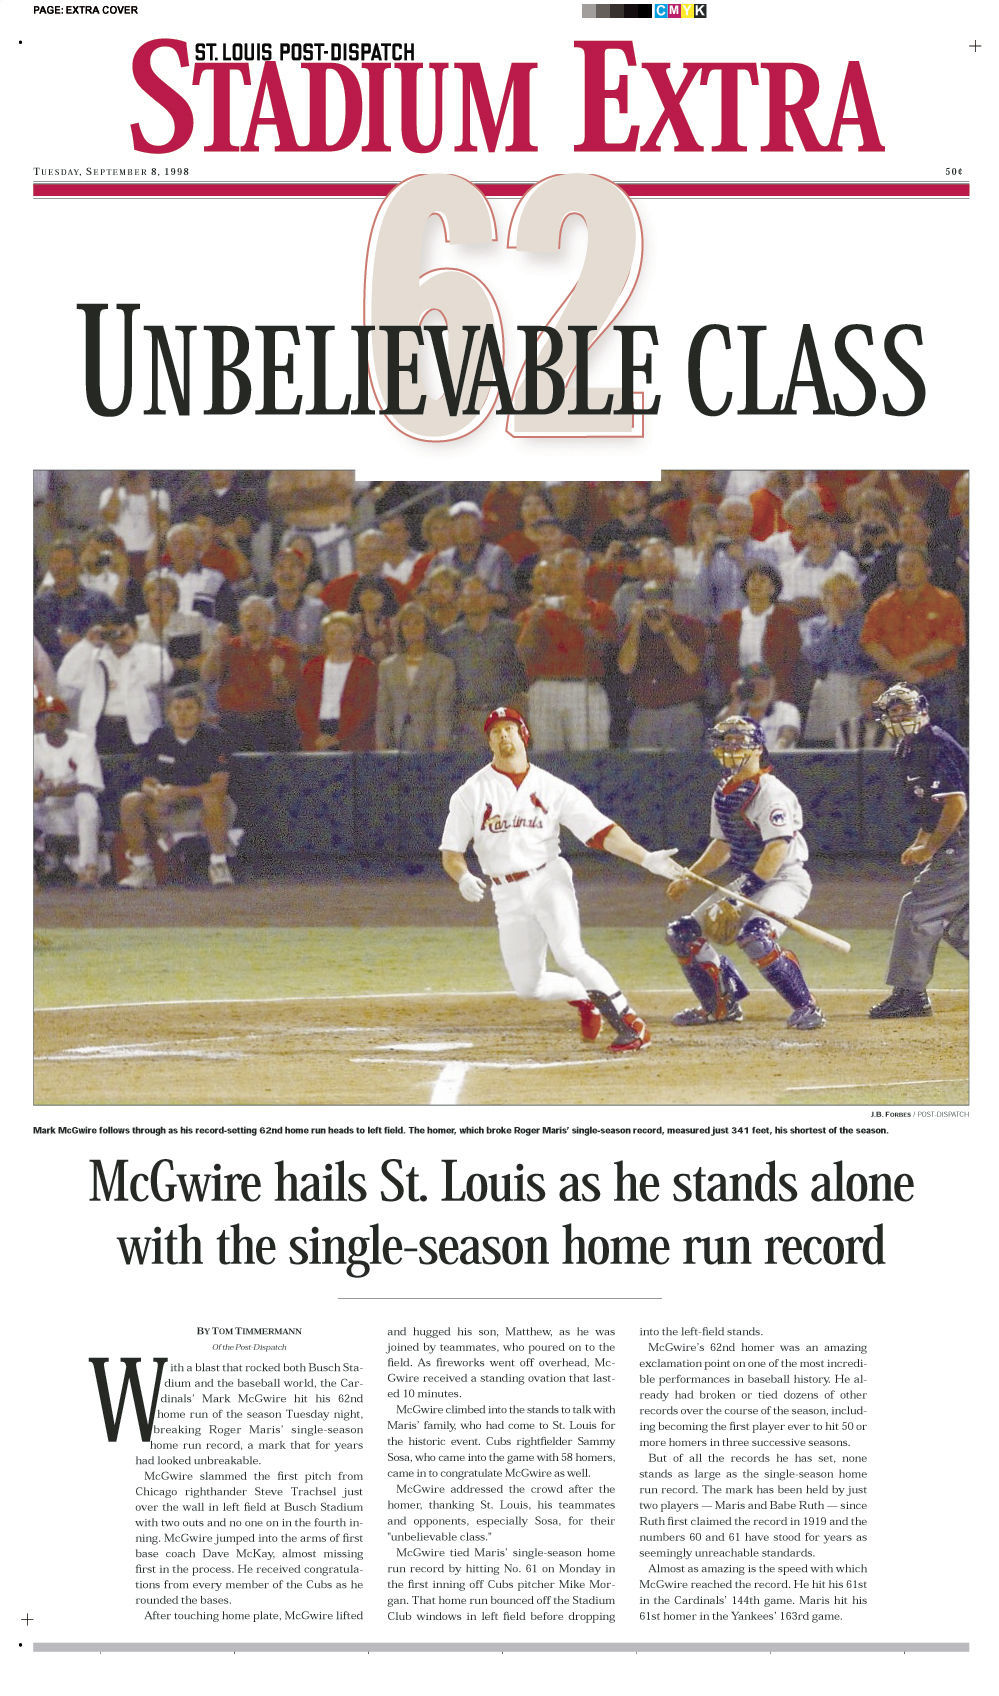 On this day in 1998 Mark McGwire broke the home run record - A